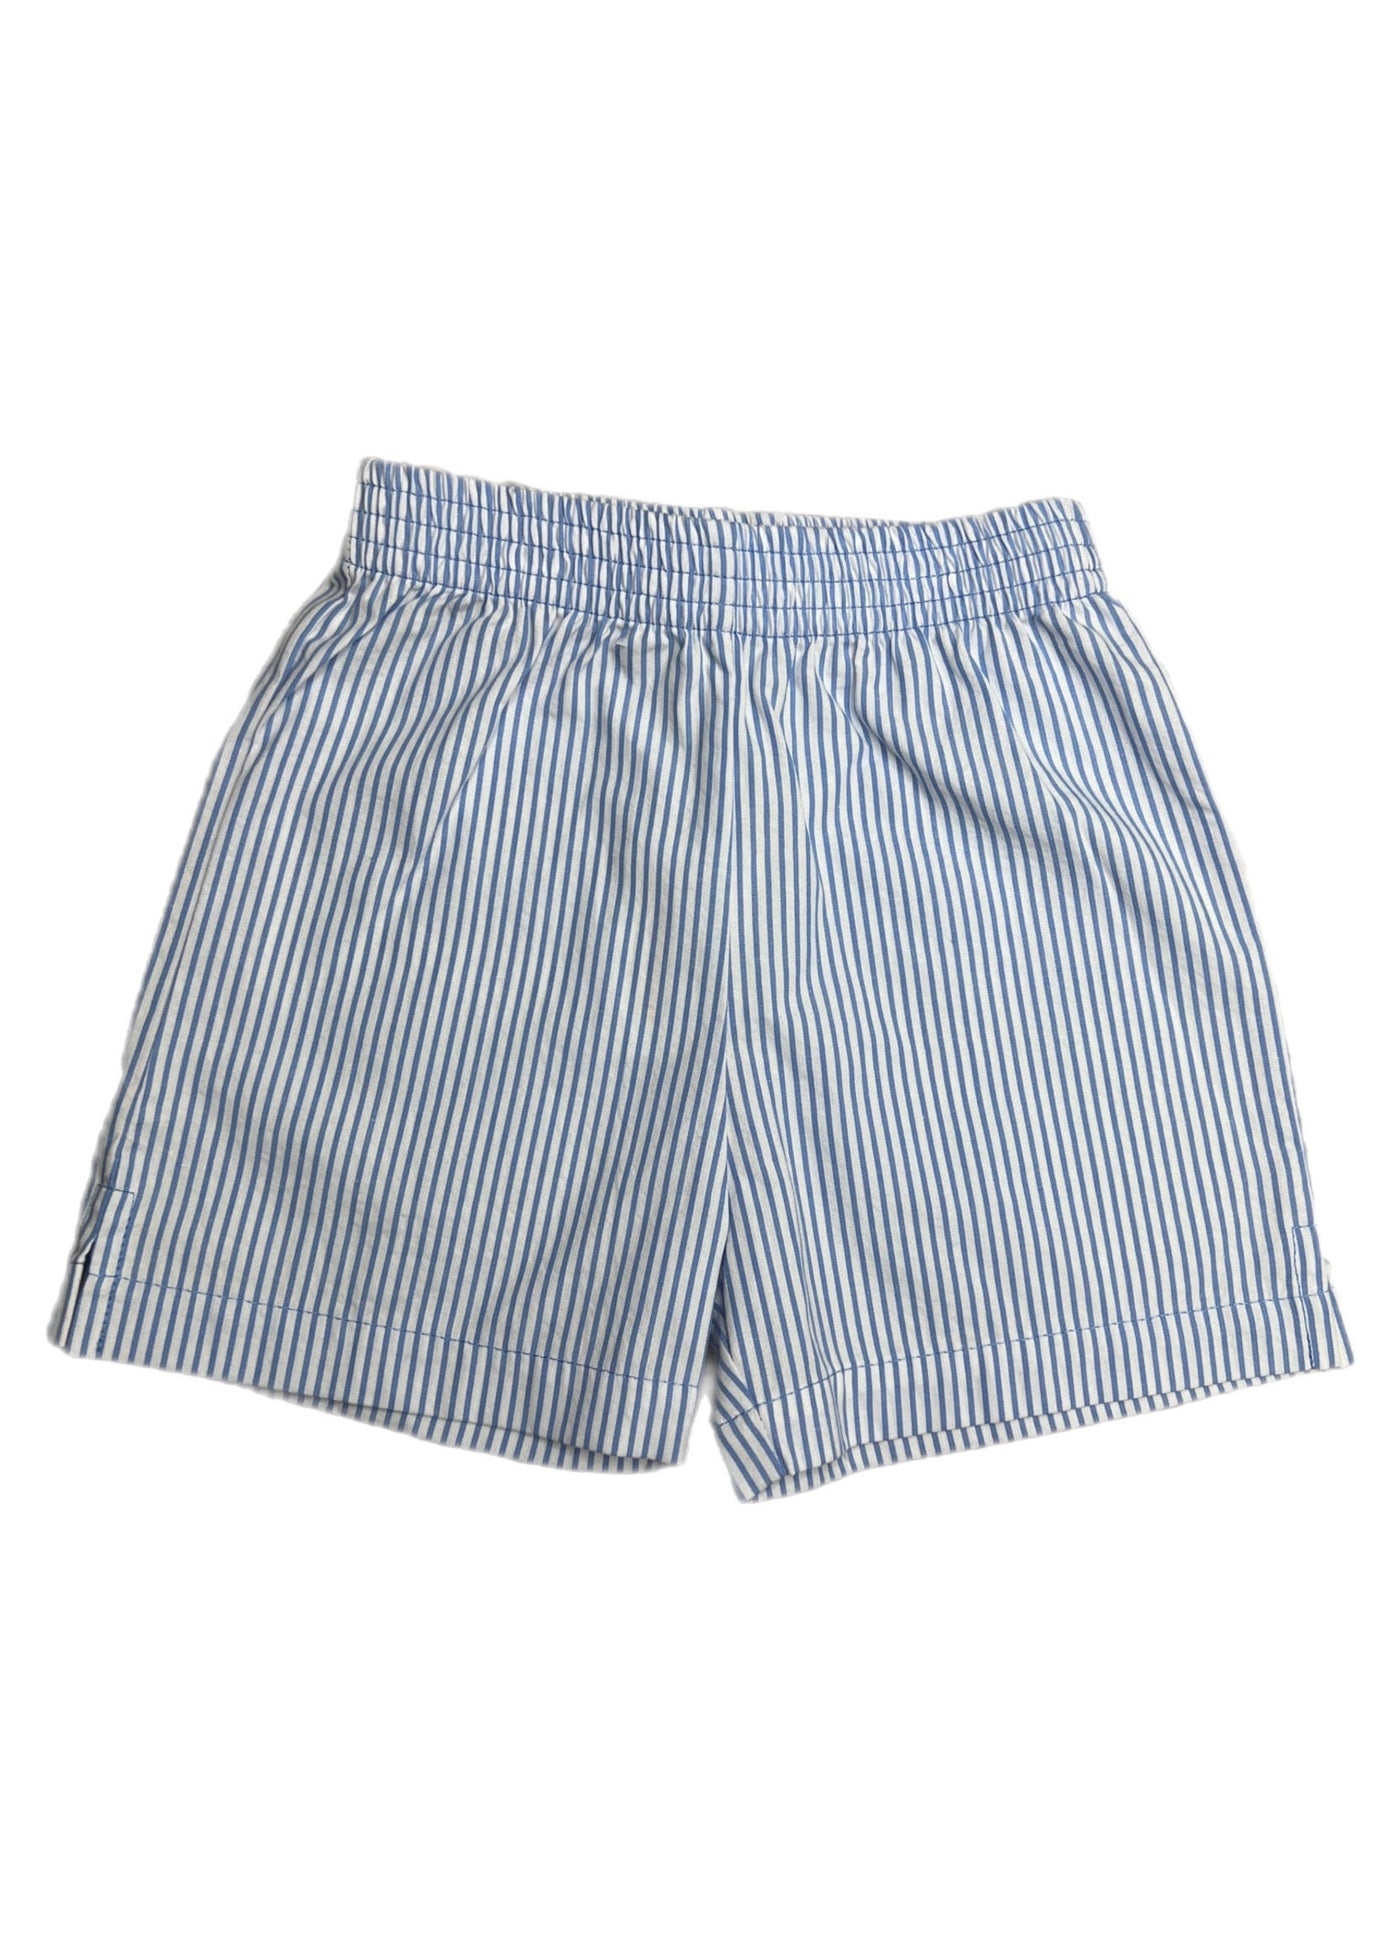 Chambray and White Seersucker Shorts